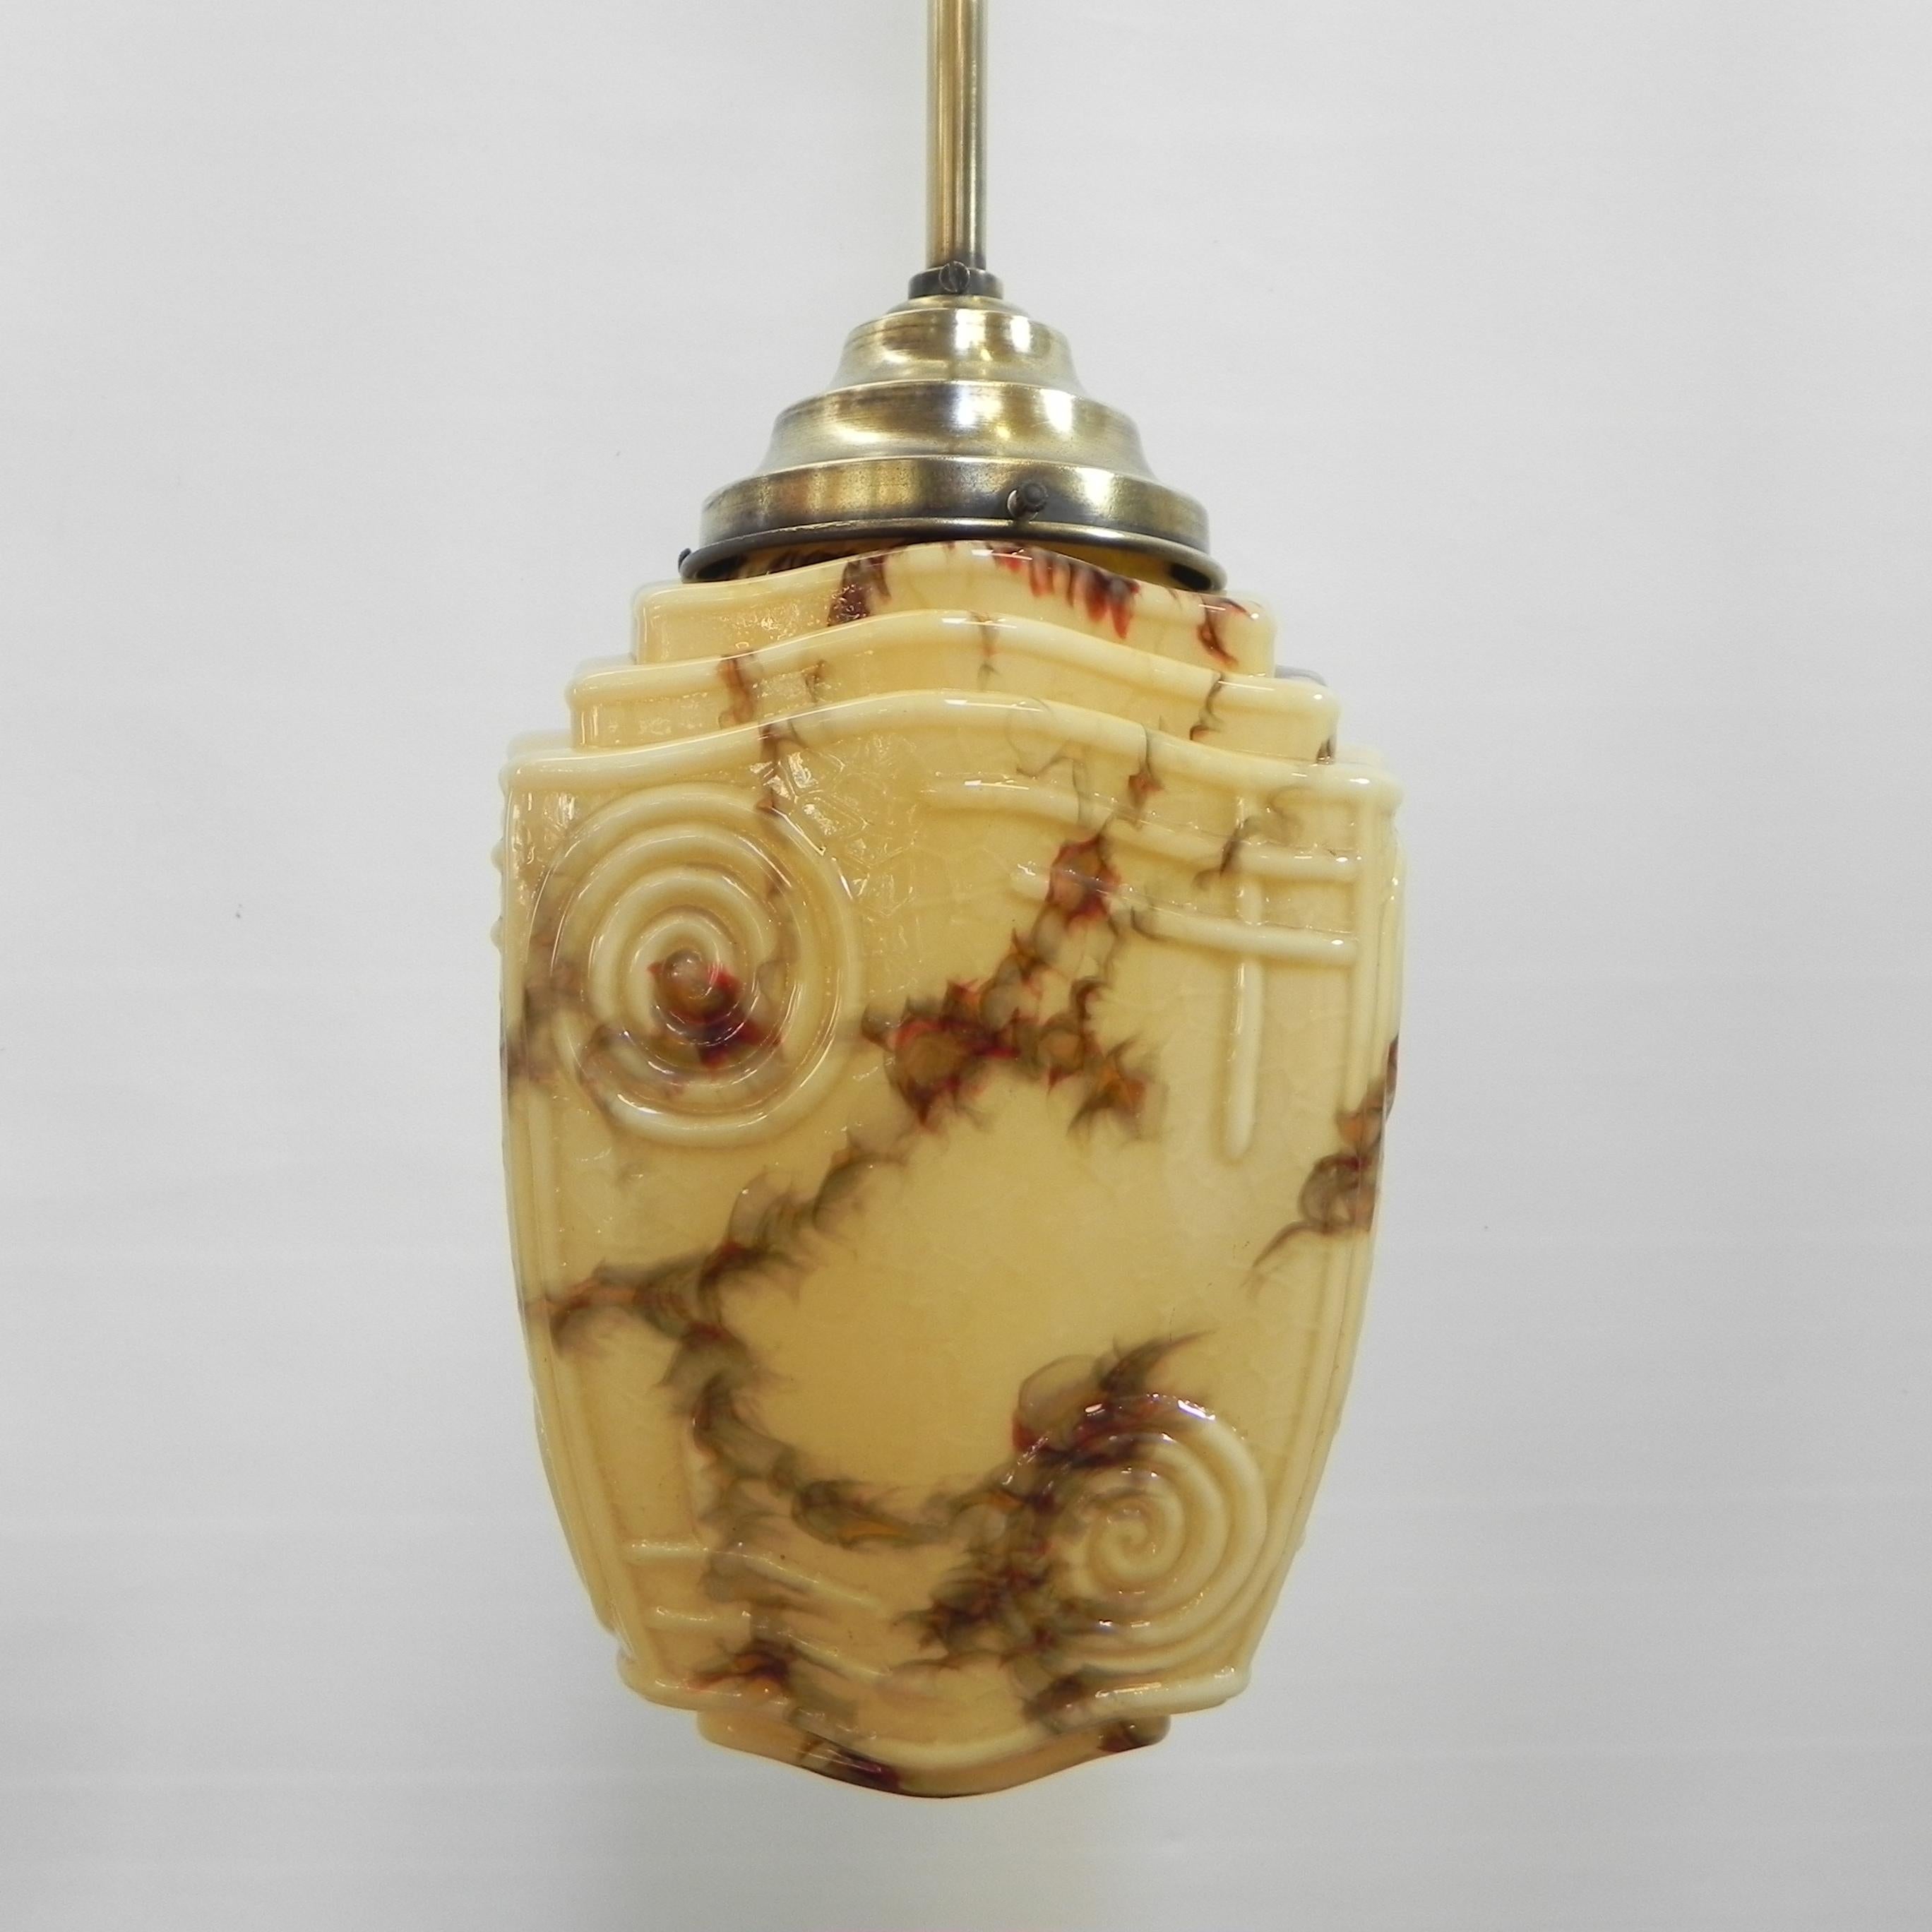 Art Deco hanging lamp with marbled glass shade For Sale 1